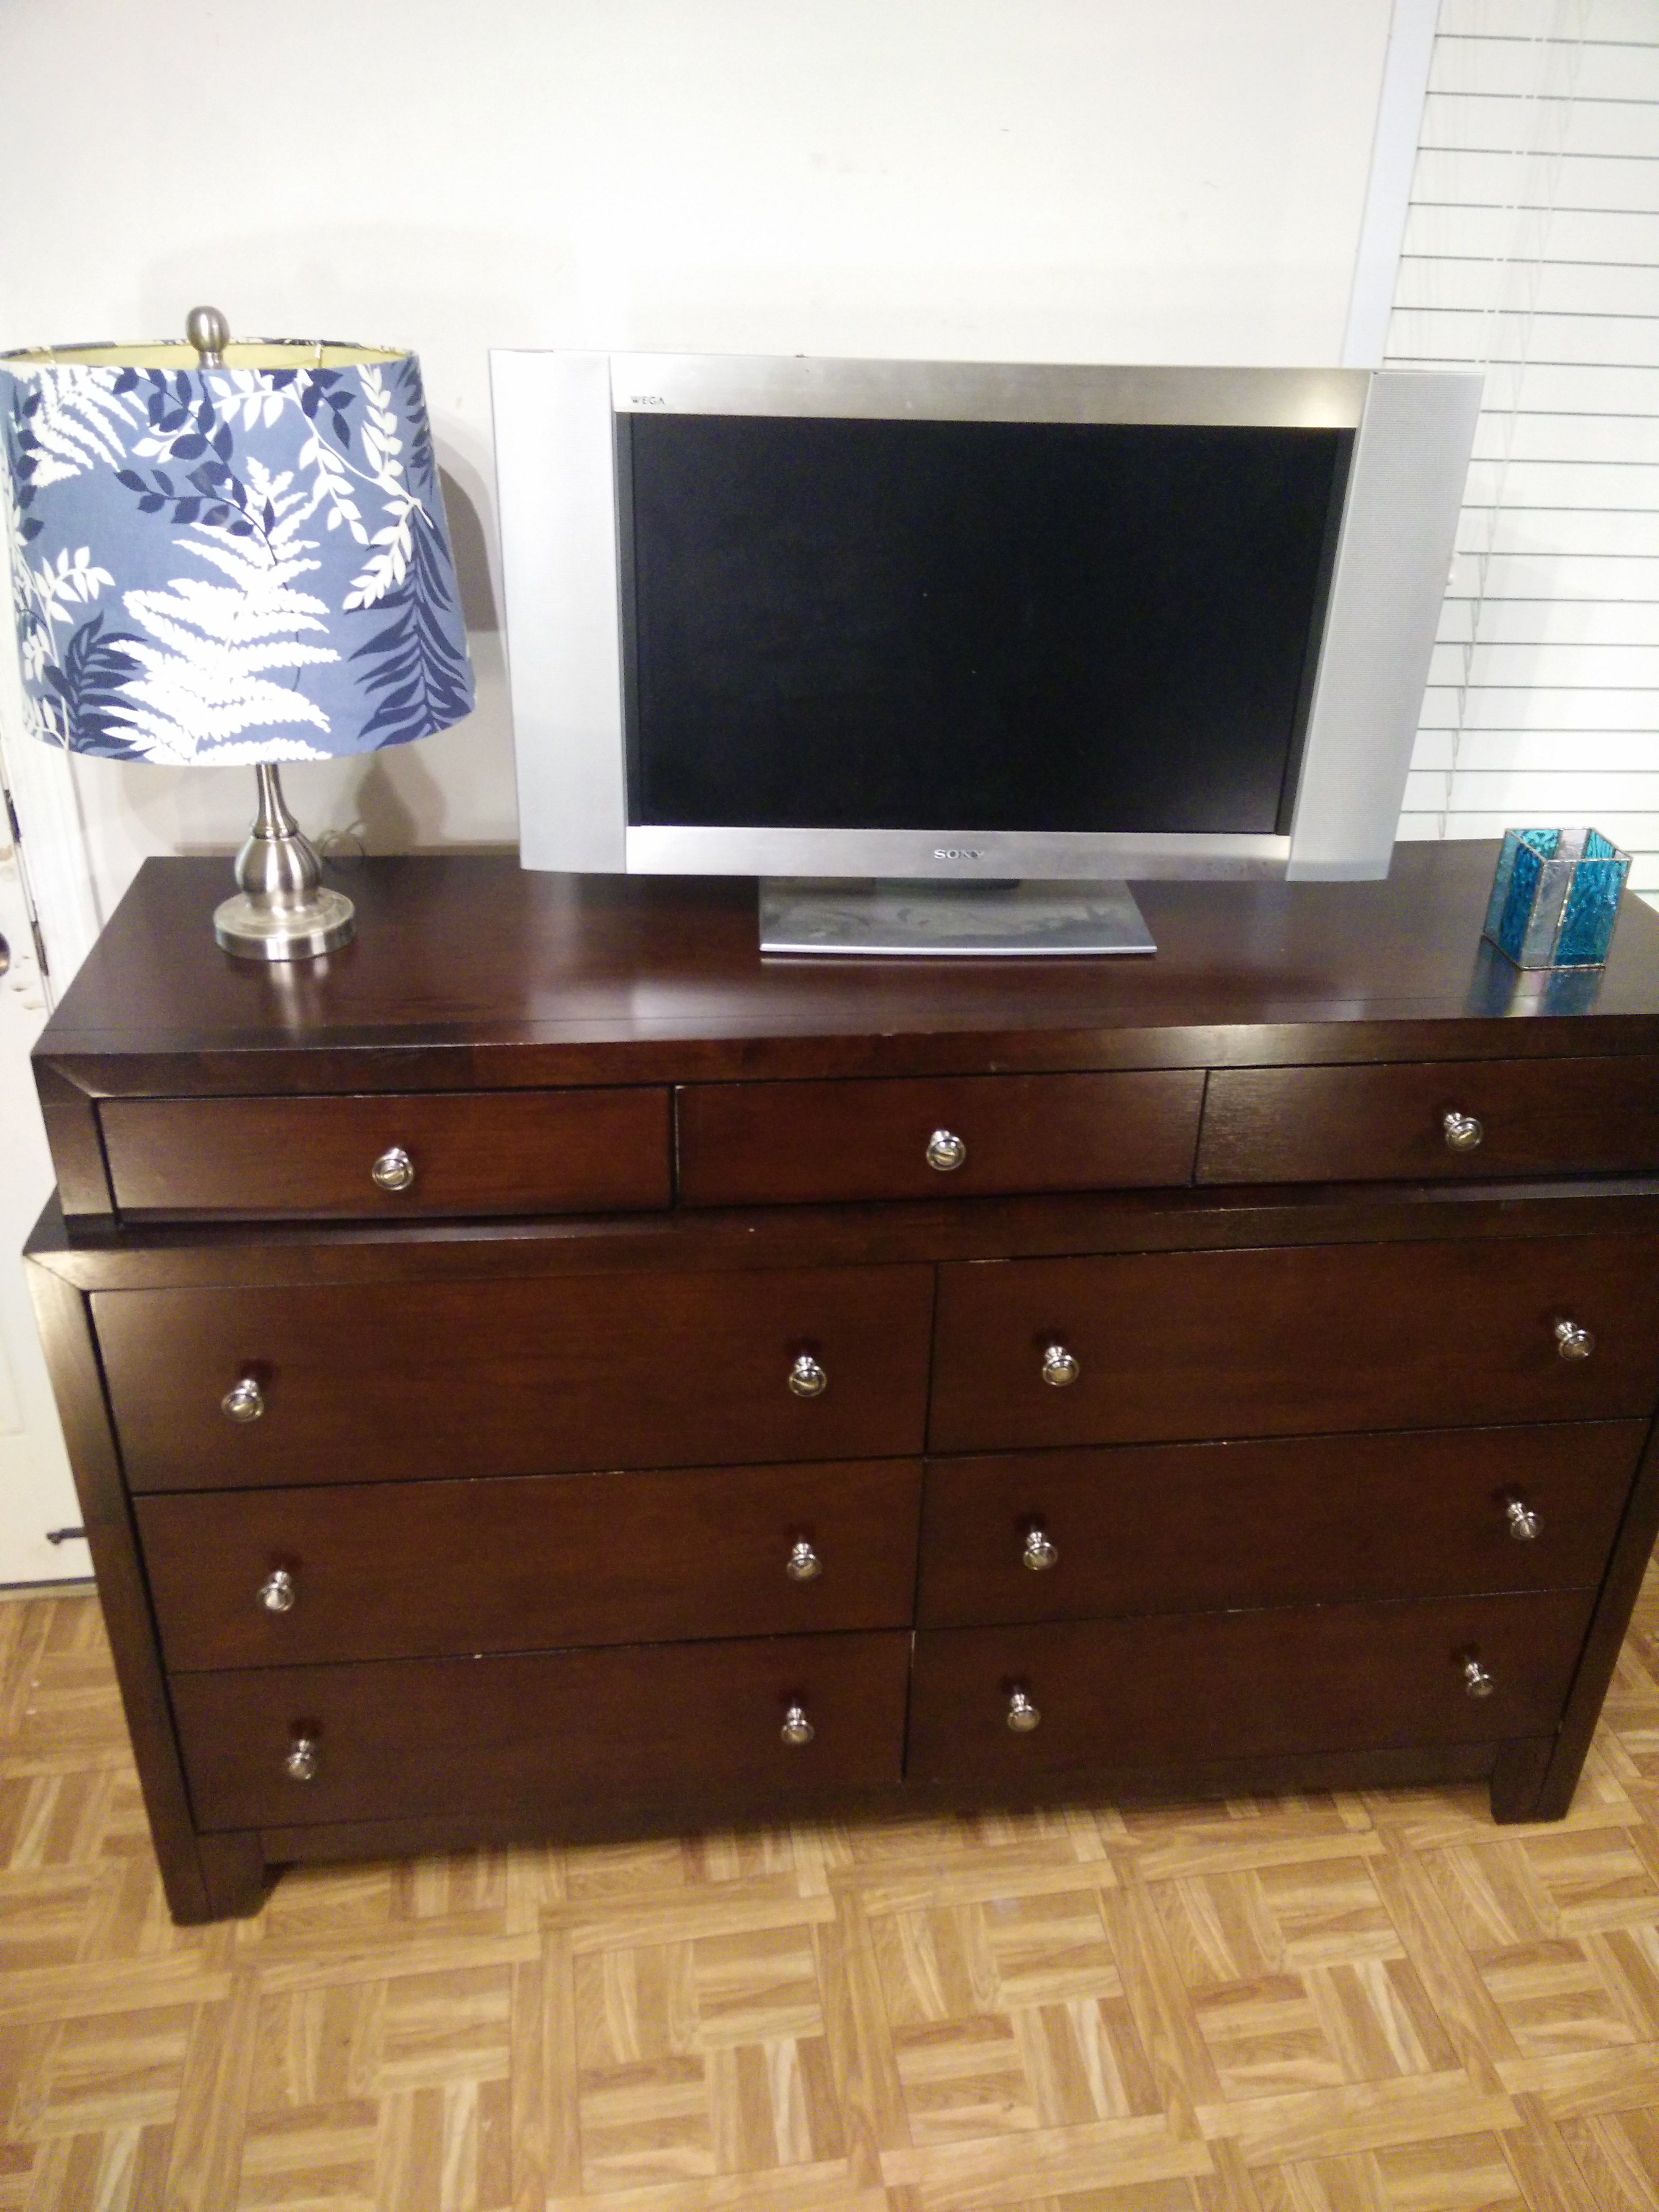 Like new wood dresser/TV stand/buffet with 9 big Drawers in very good condition, all Drawers sliding smoothly,